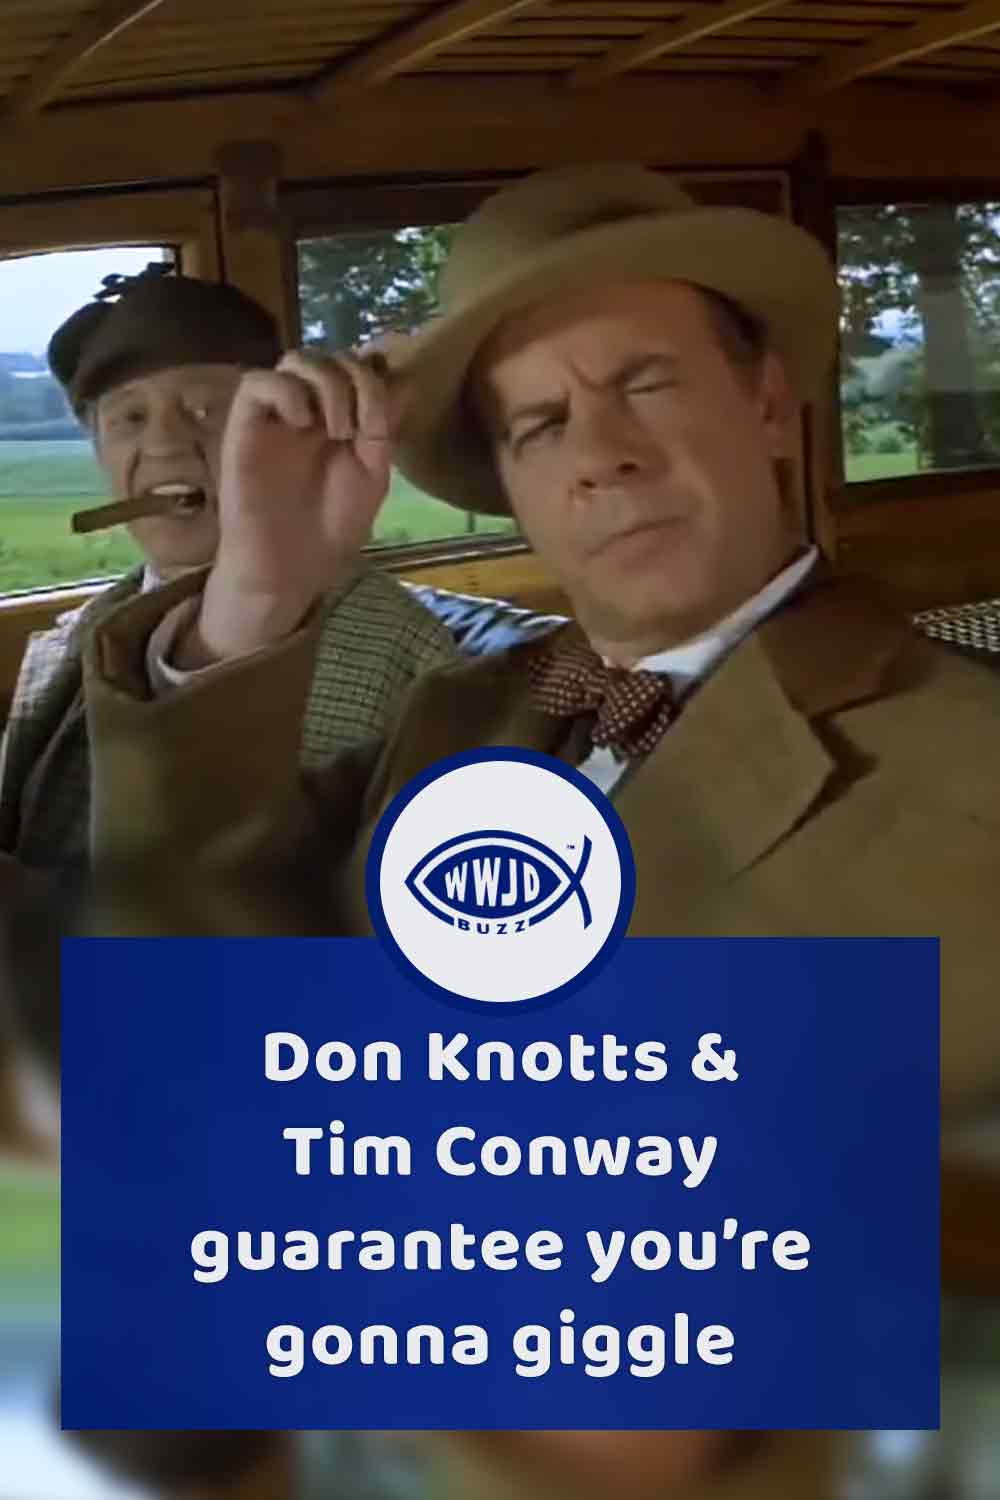 Don Knotts & Tim Conway guarantee you’re gonna giggle